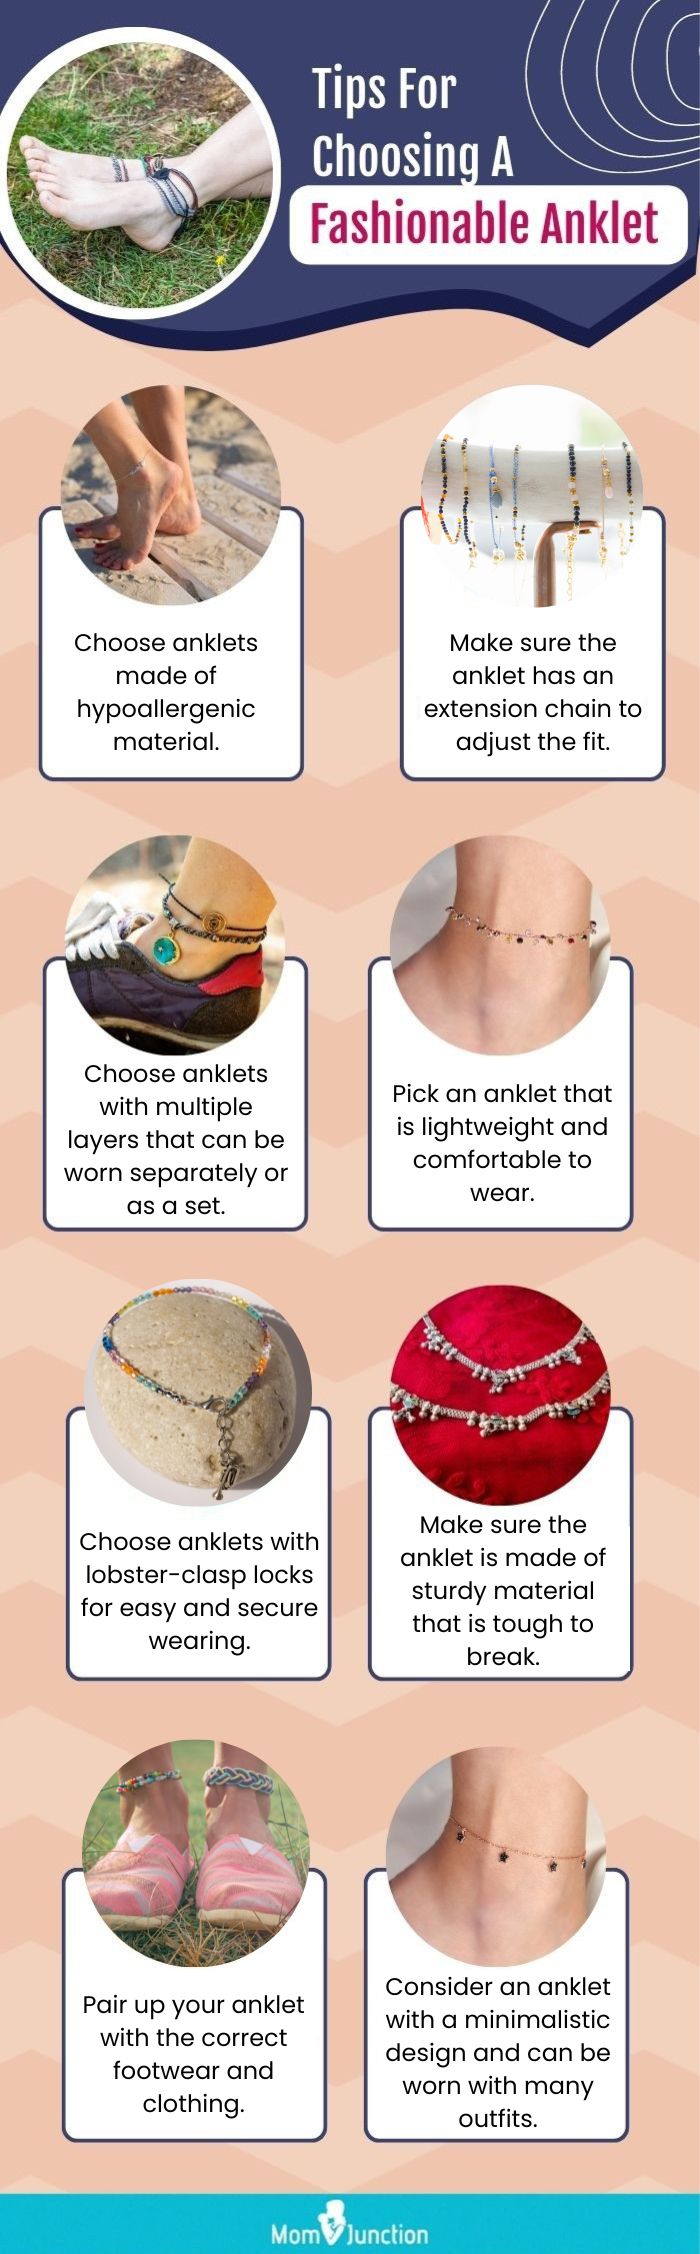 Tips For Choosing A Fashionable Anklet (infographic)